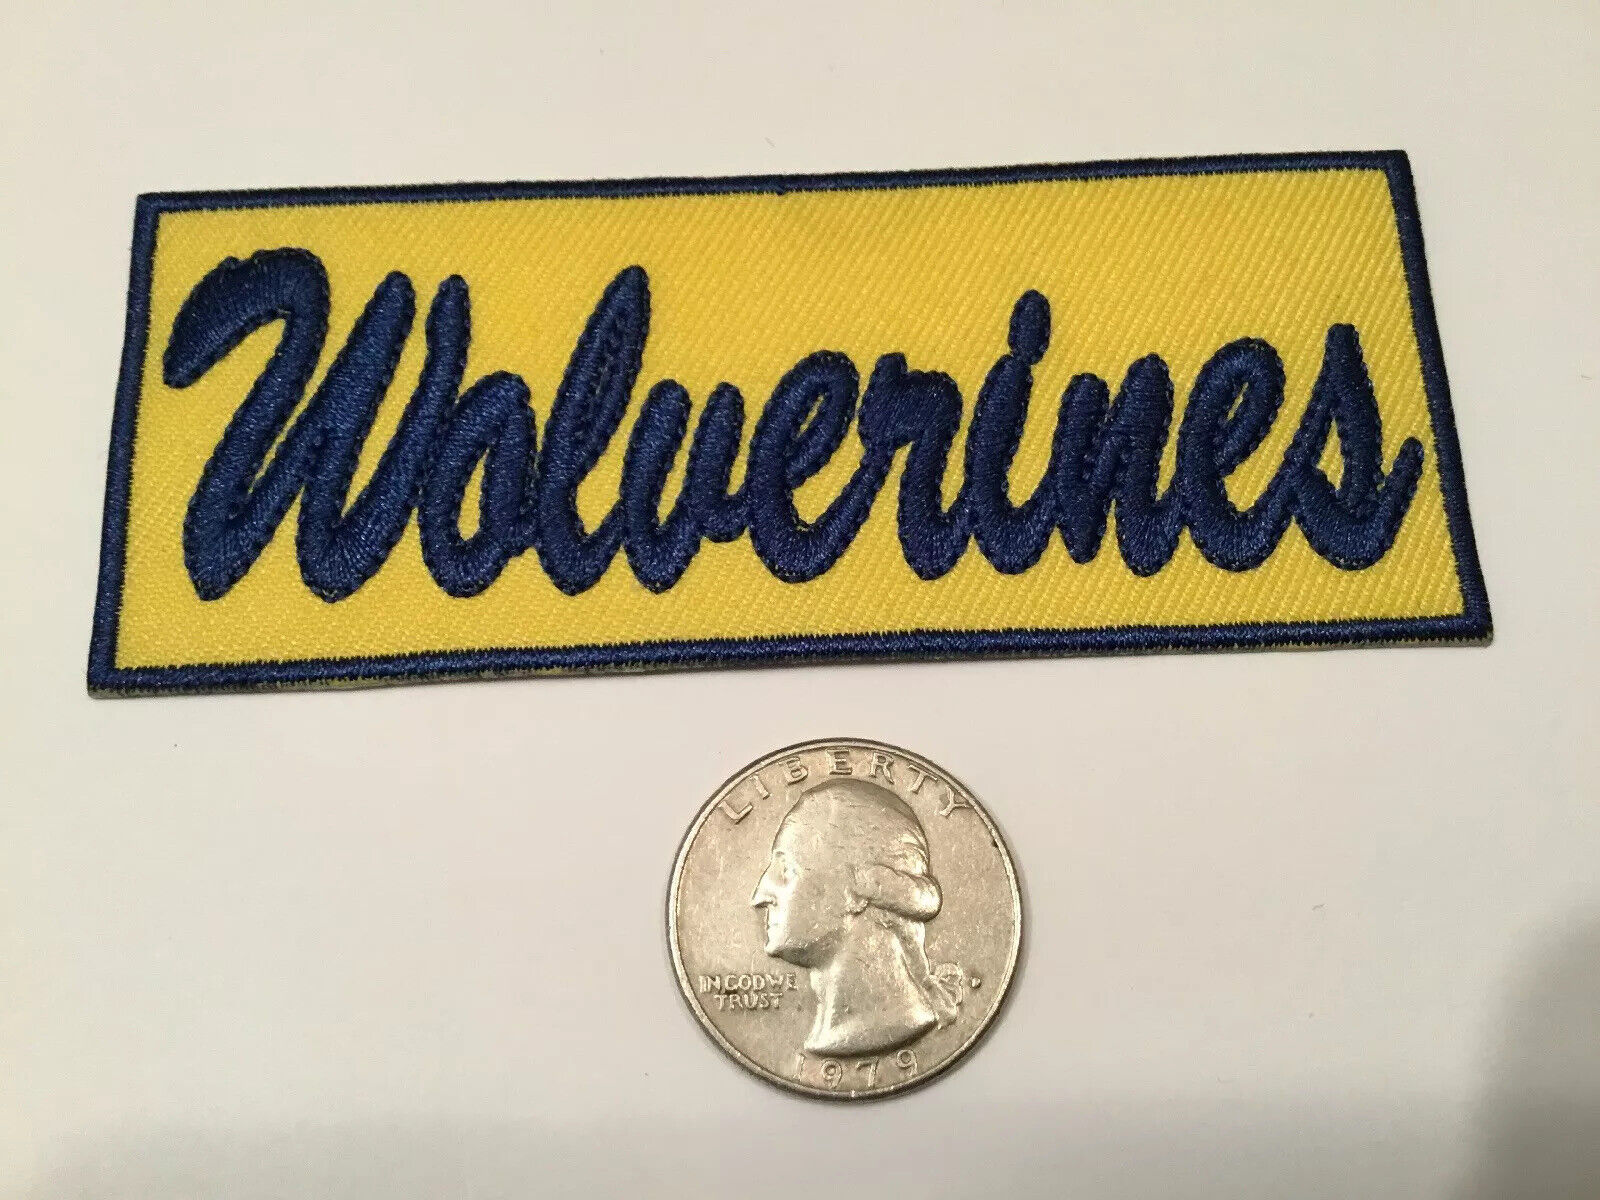 The University Of Michigan Wolverines Vintage Embroidered Iron On Patch 4” X 1.5